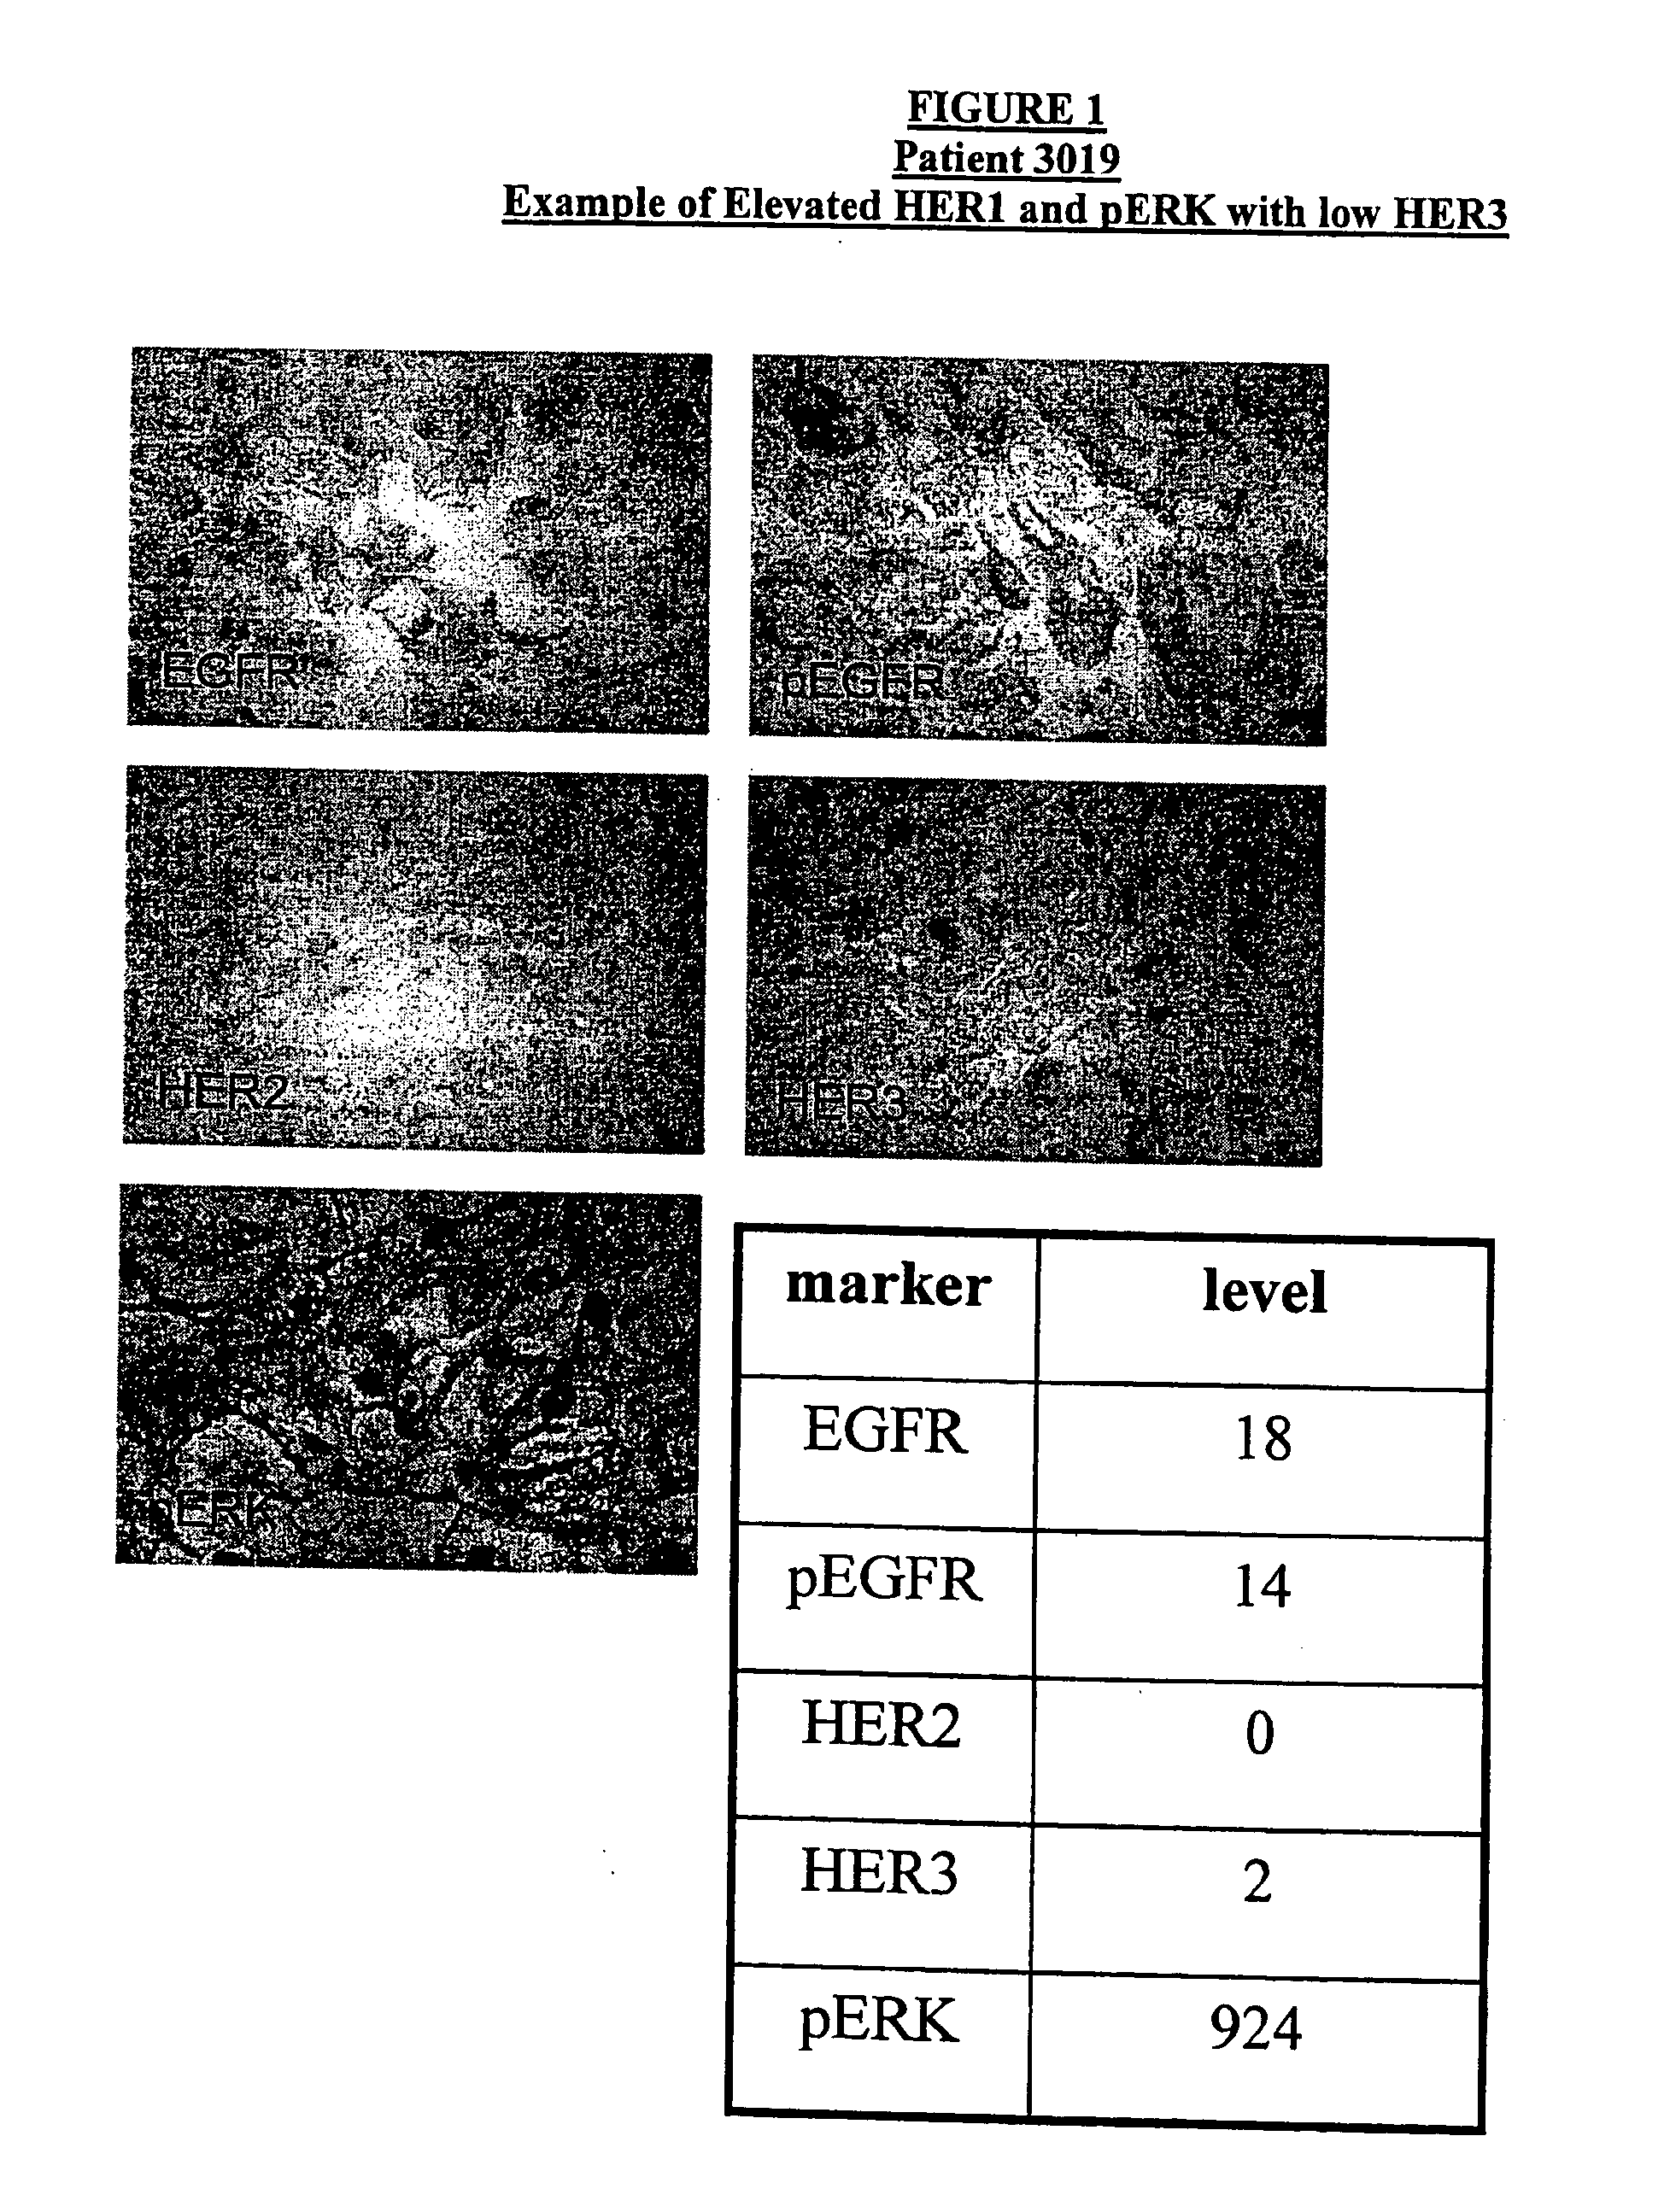 Method for Predicting Response to Epidermal Growth Factor Receptor-Directed Therapy